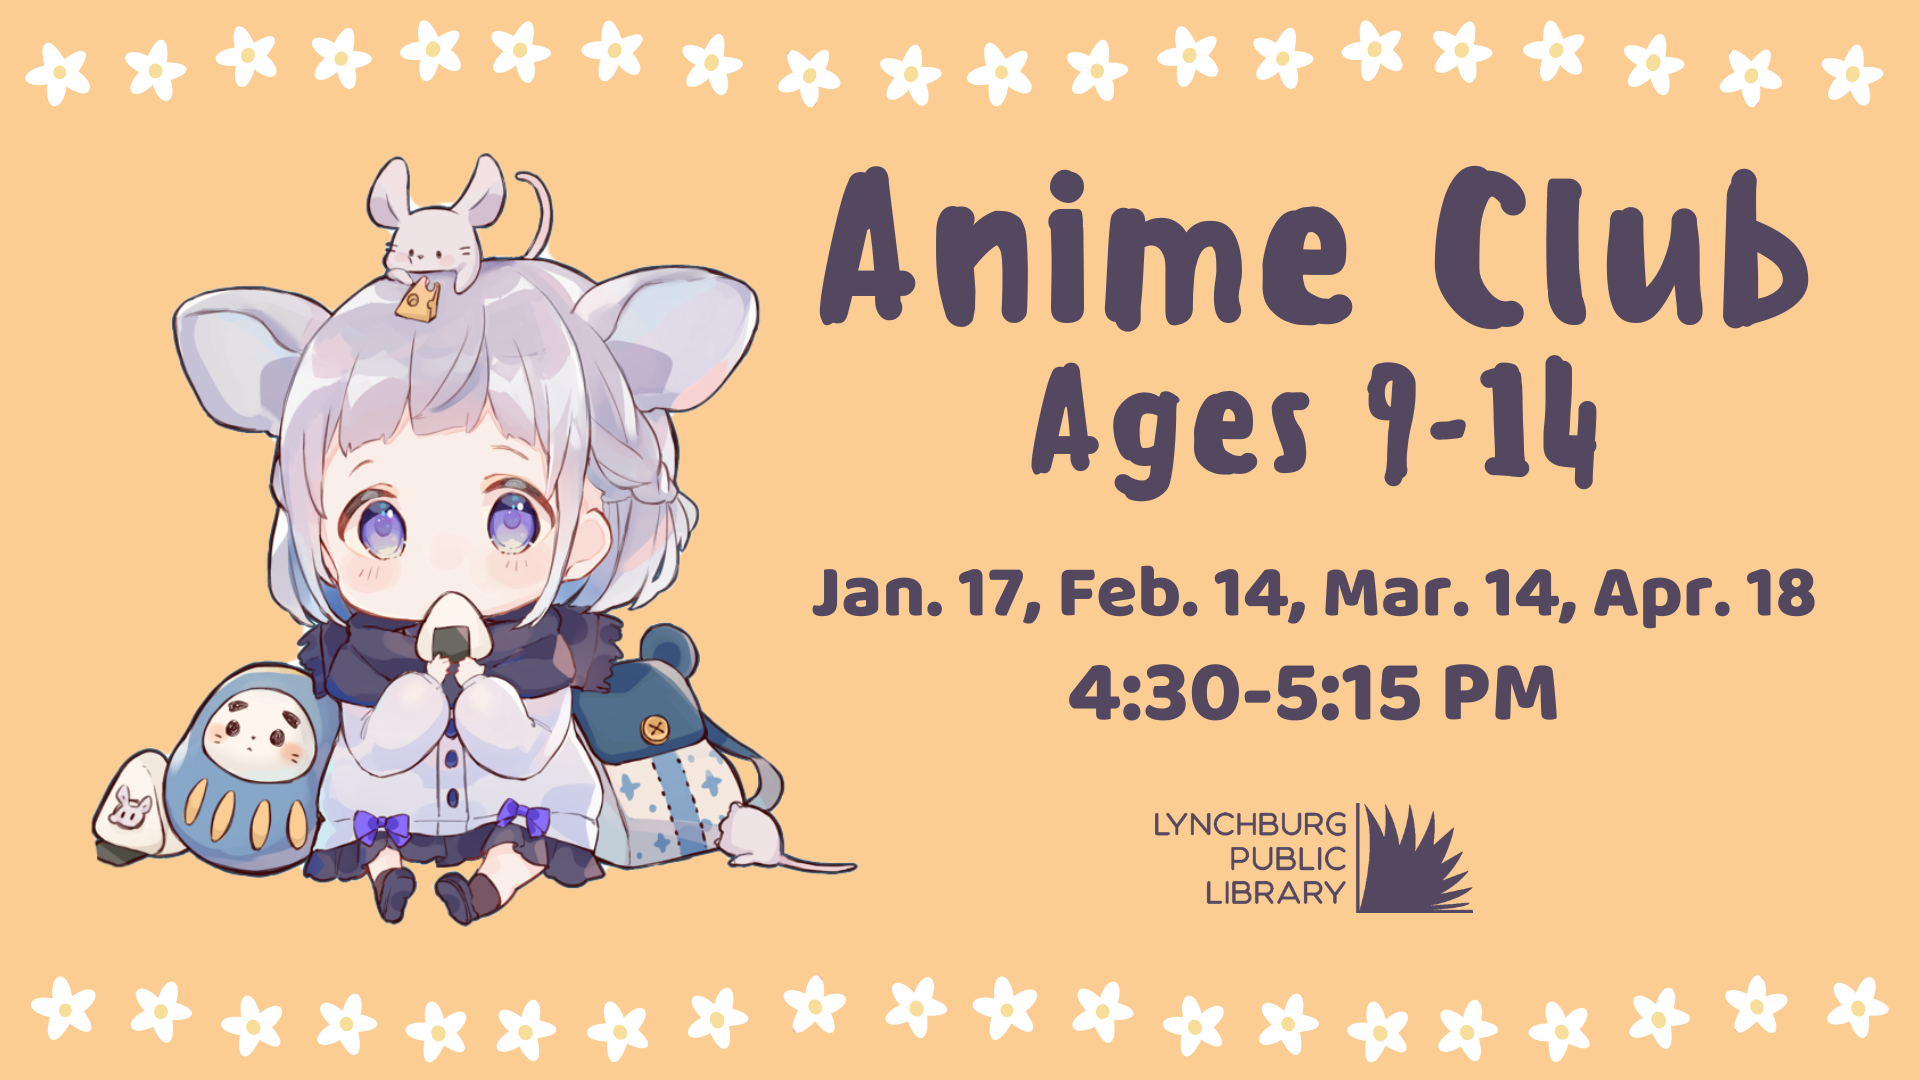 Image of a chibi-style girl with animal friends alongside information about LPL's Spring 2023 Anime Club (ages 9-14) program